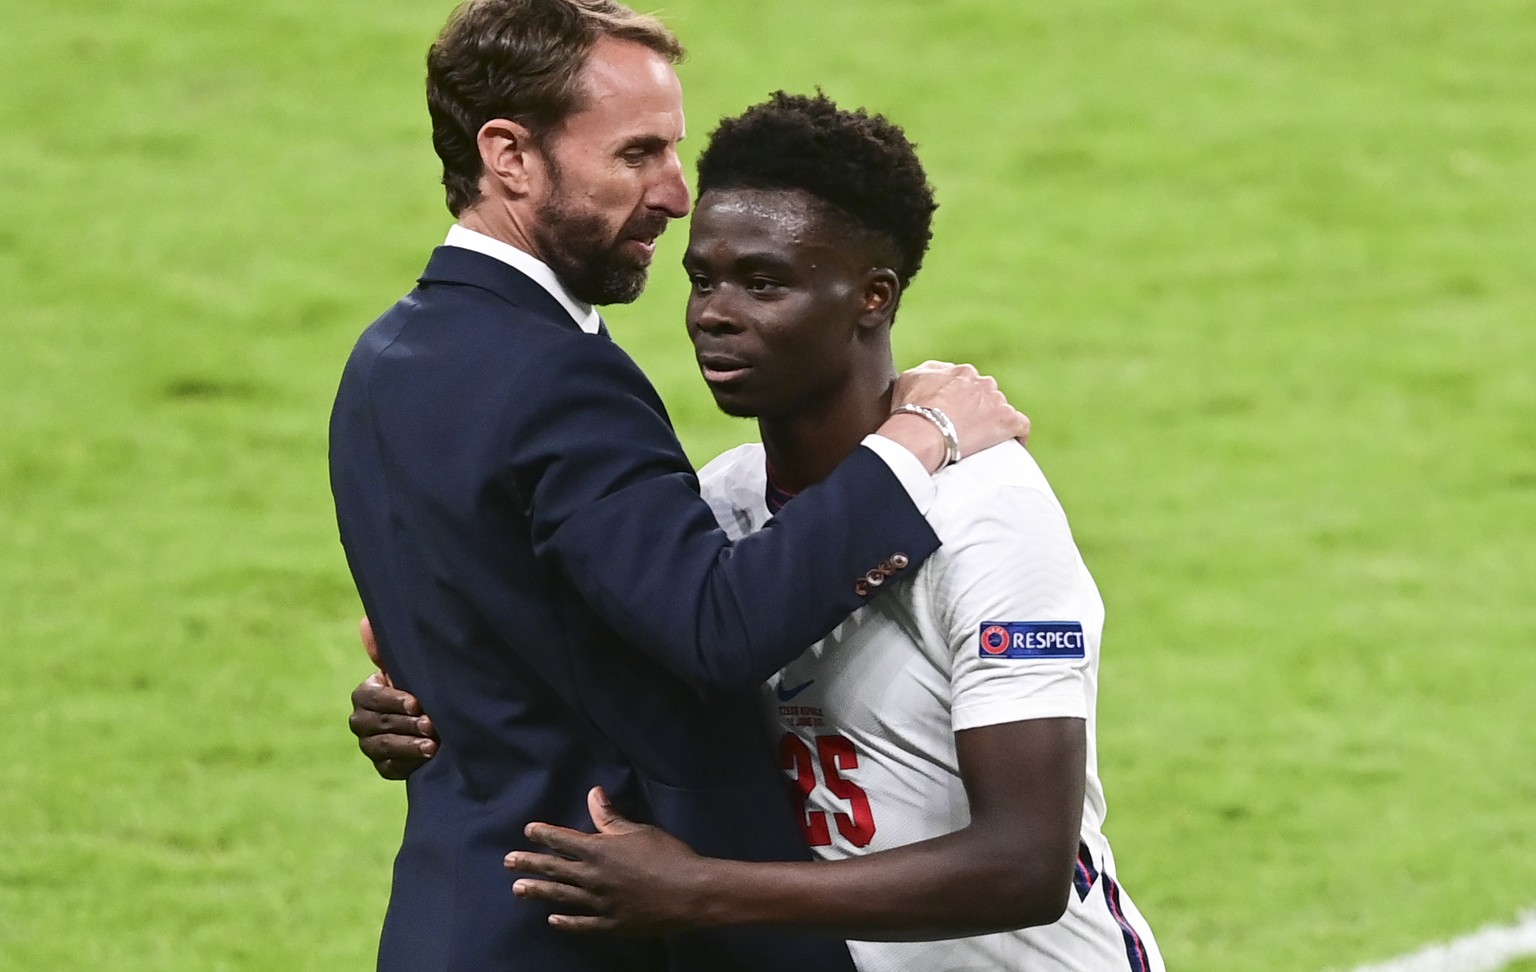 England&#039;s manager Gareth Southgate embraces Bukayo Saka as he leaves the field during the Euro 2020 soccer championship group D match between the Czech Republic and England at Wembley stadium, Lo ...